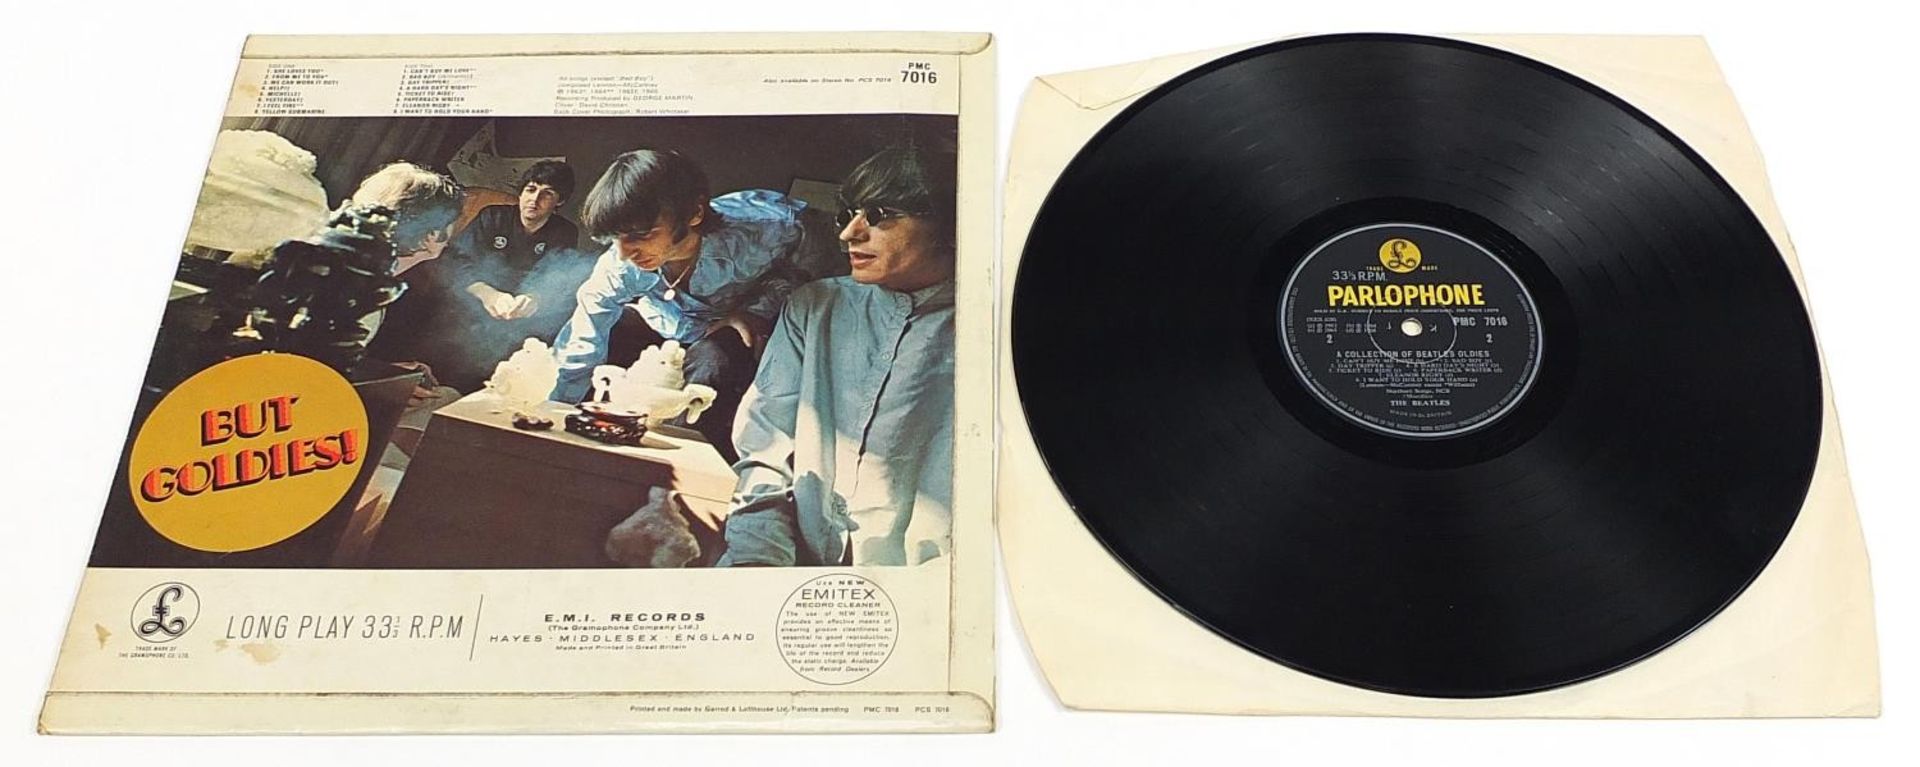 The Beatles, John Lennon & Yoko Ono vinyl LP records including Walls and Bridges with poster, - Image 37 of 41